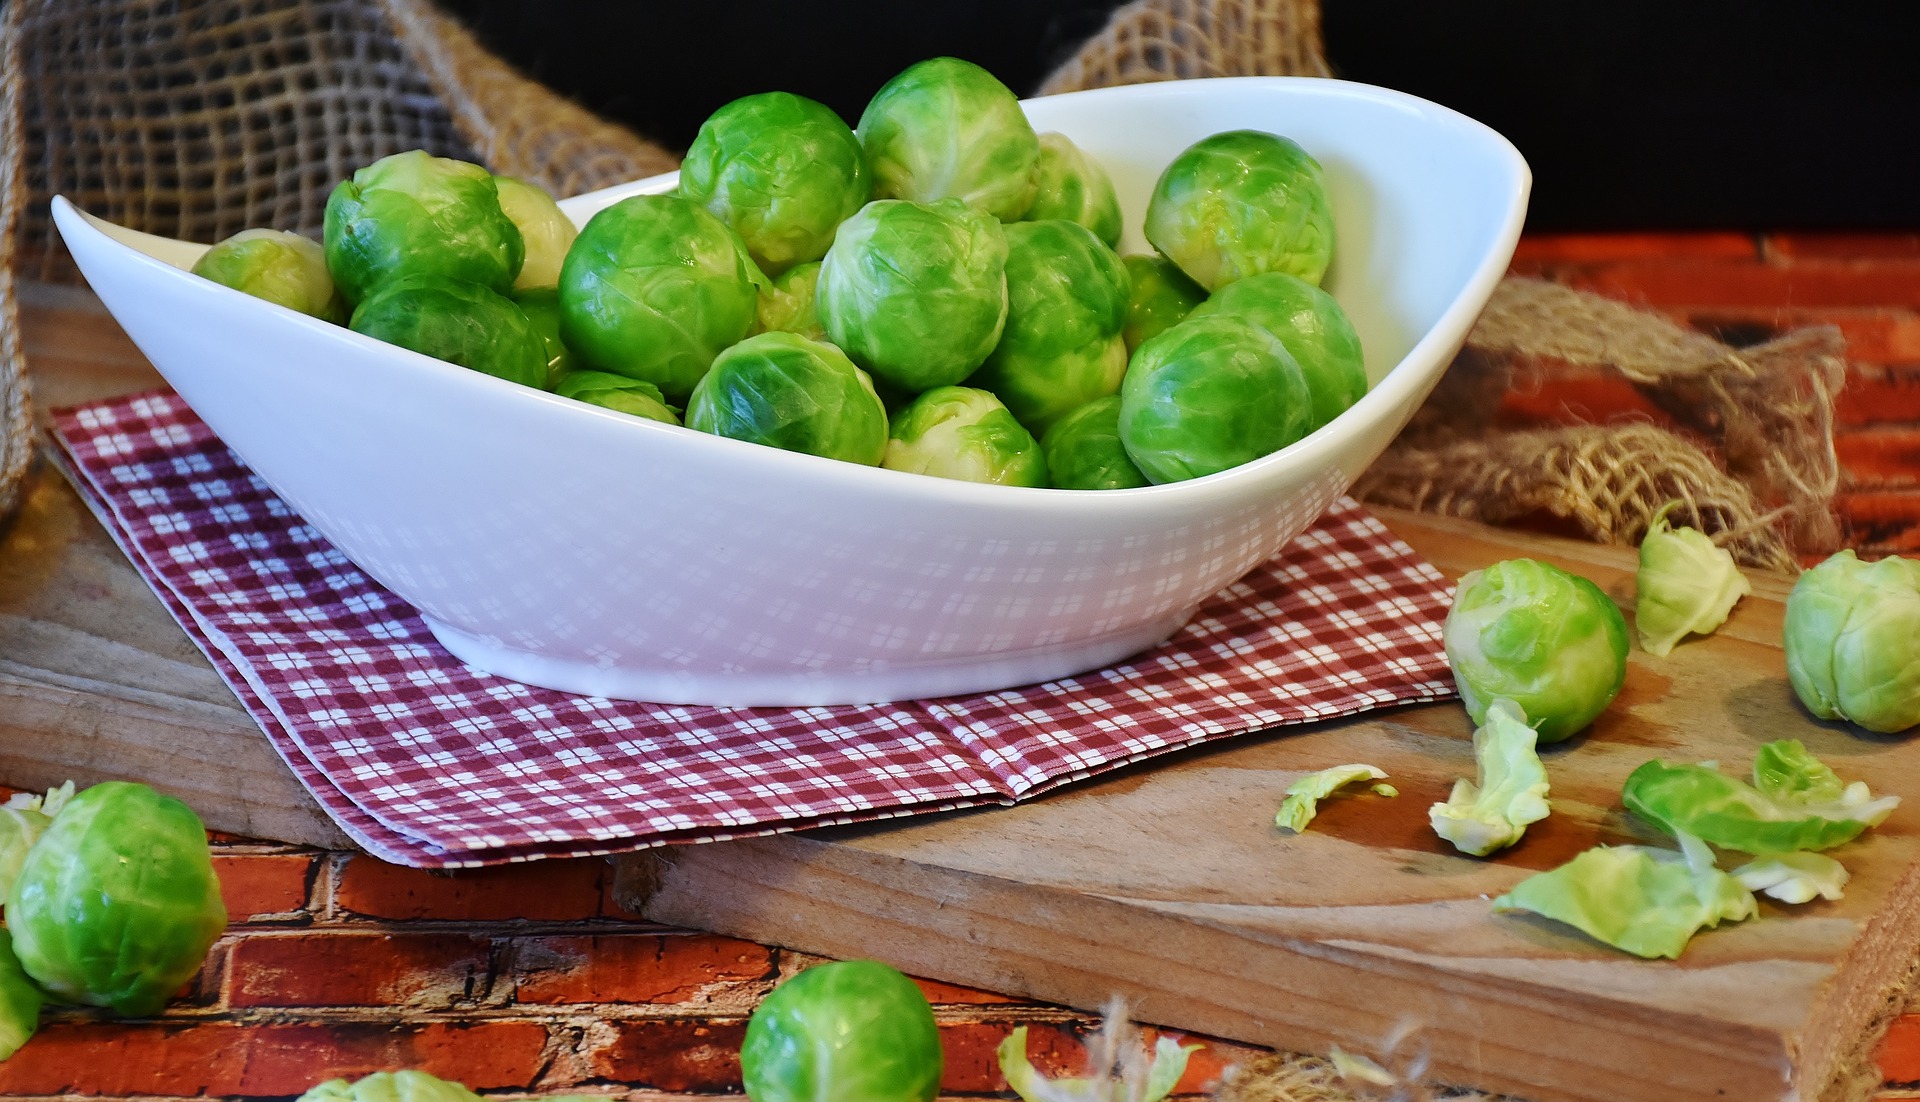 Chef's Choice: Roasted Brussel Sprouts with Pancetta